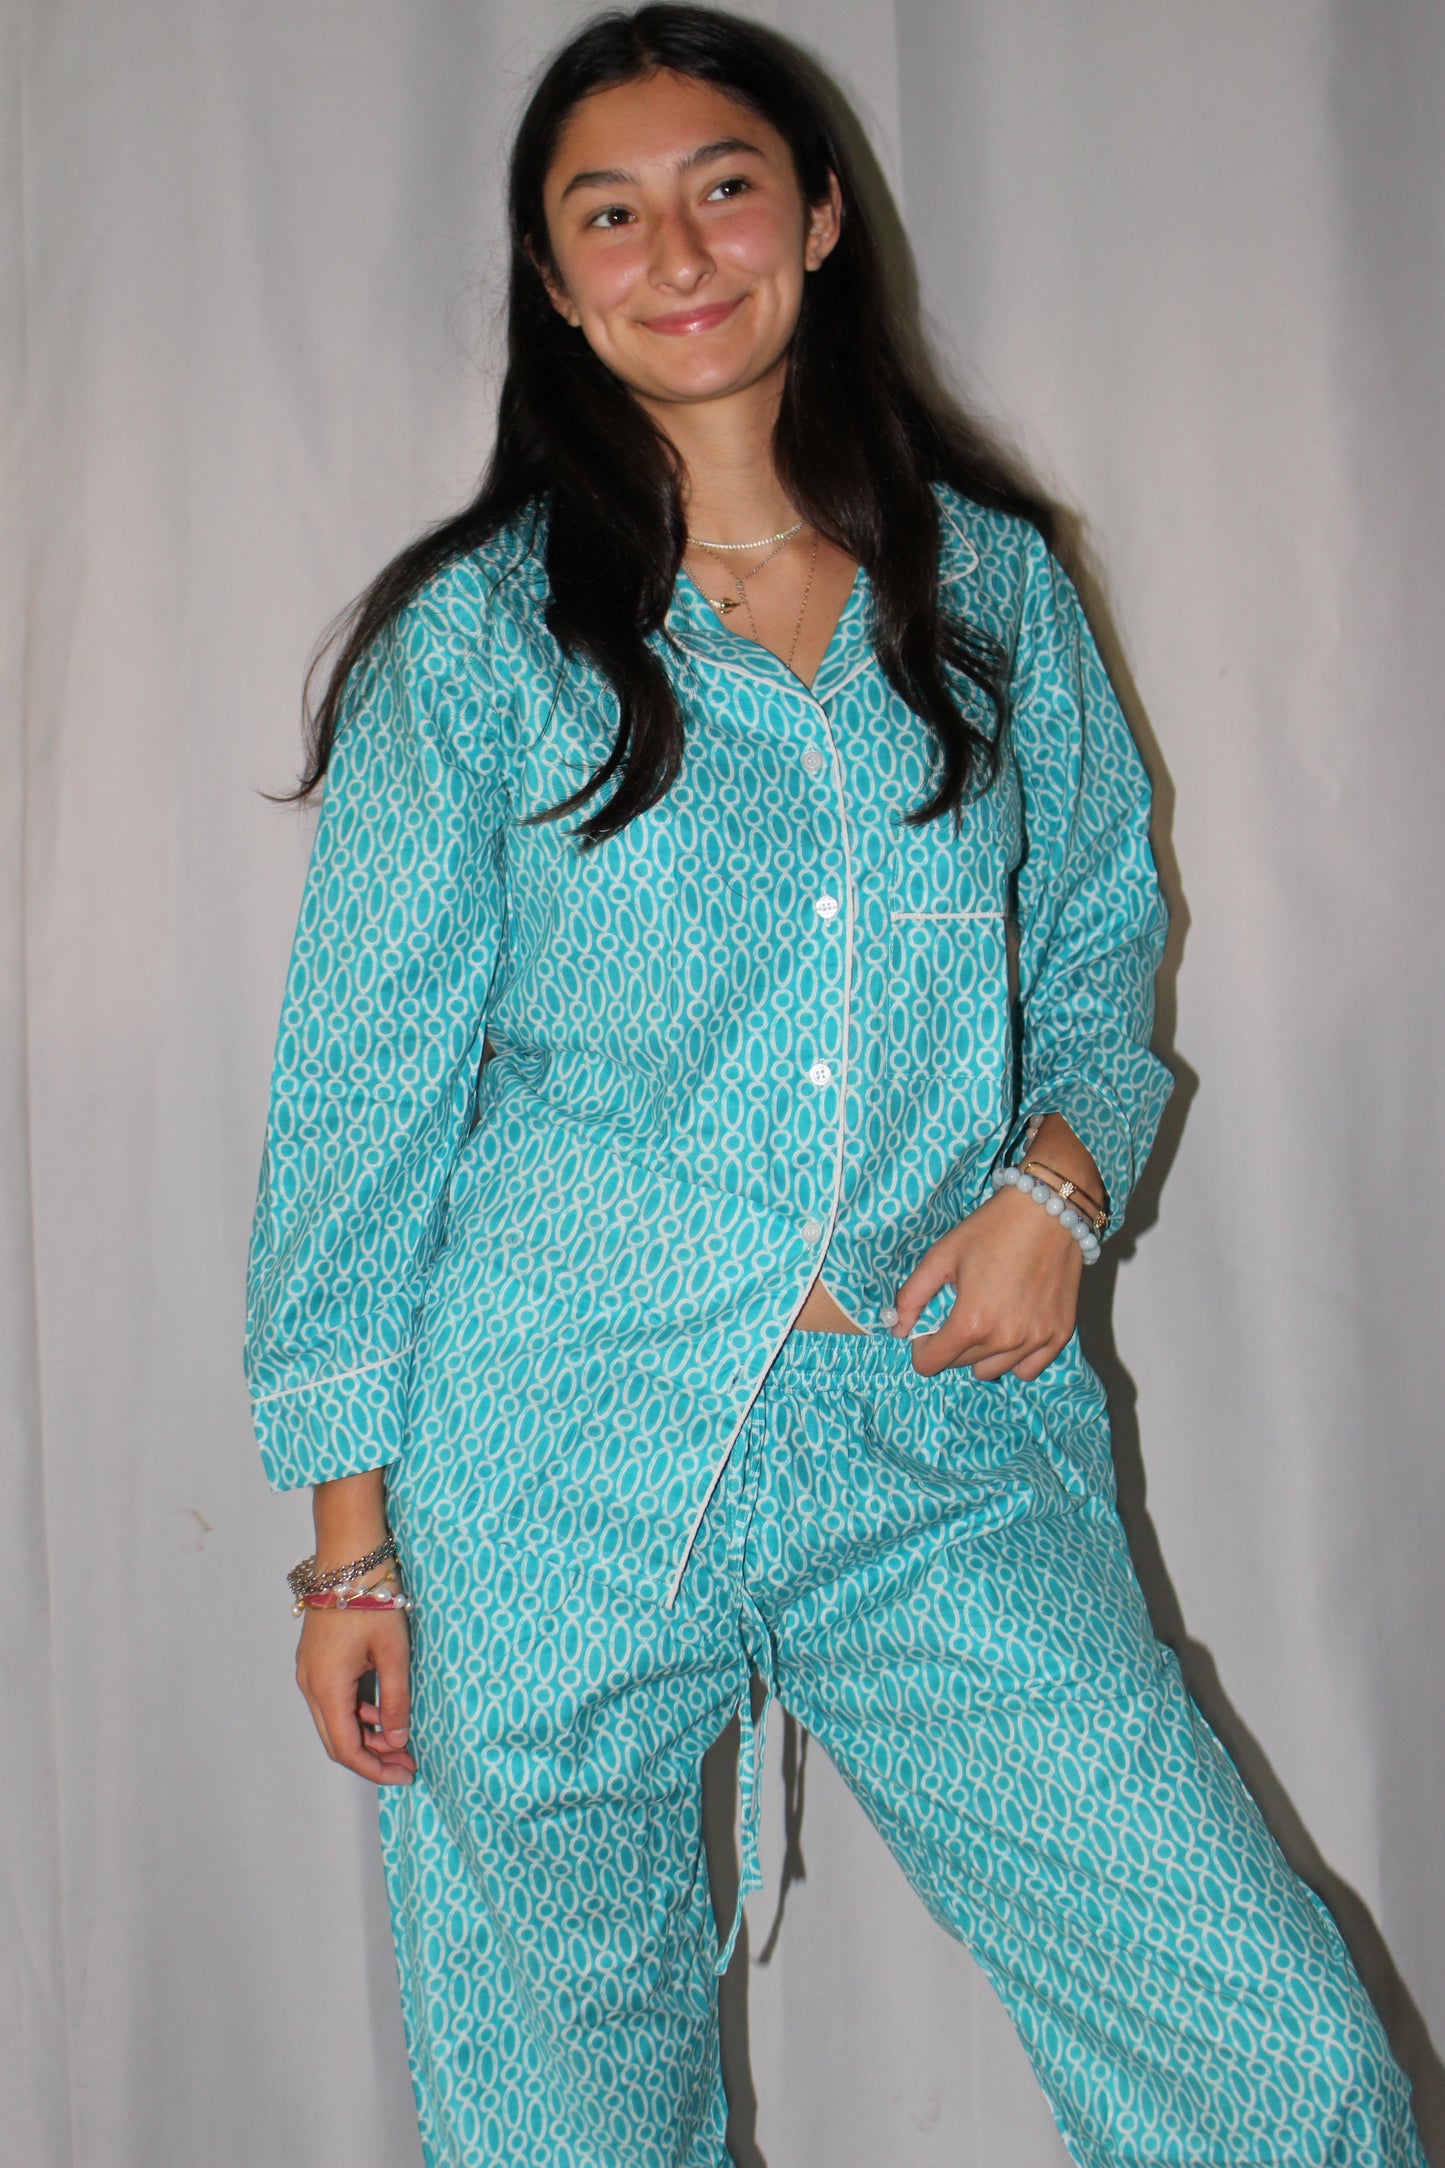 Turquoise Pajamas with White Mughal Oval Pattern - DharBazaar